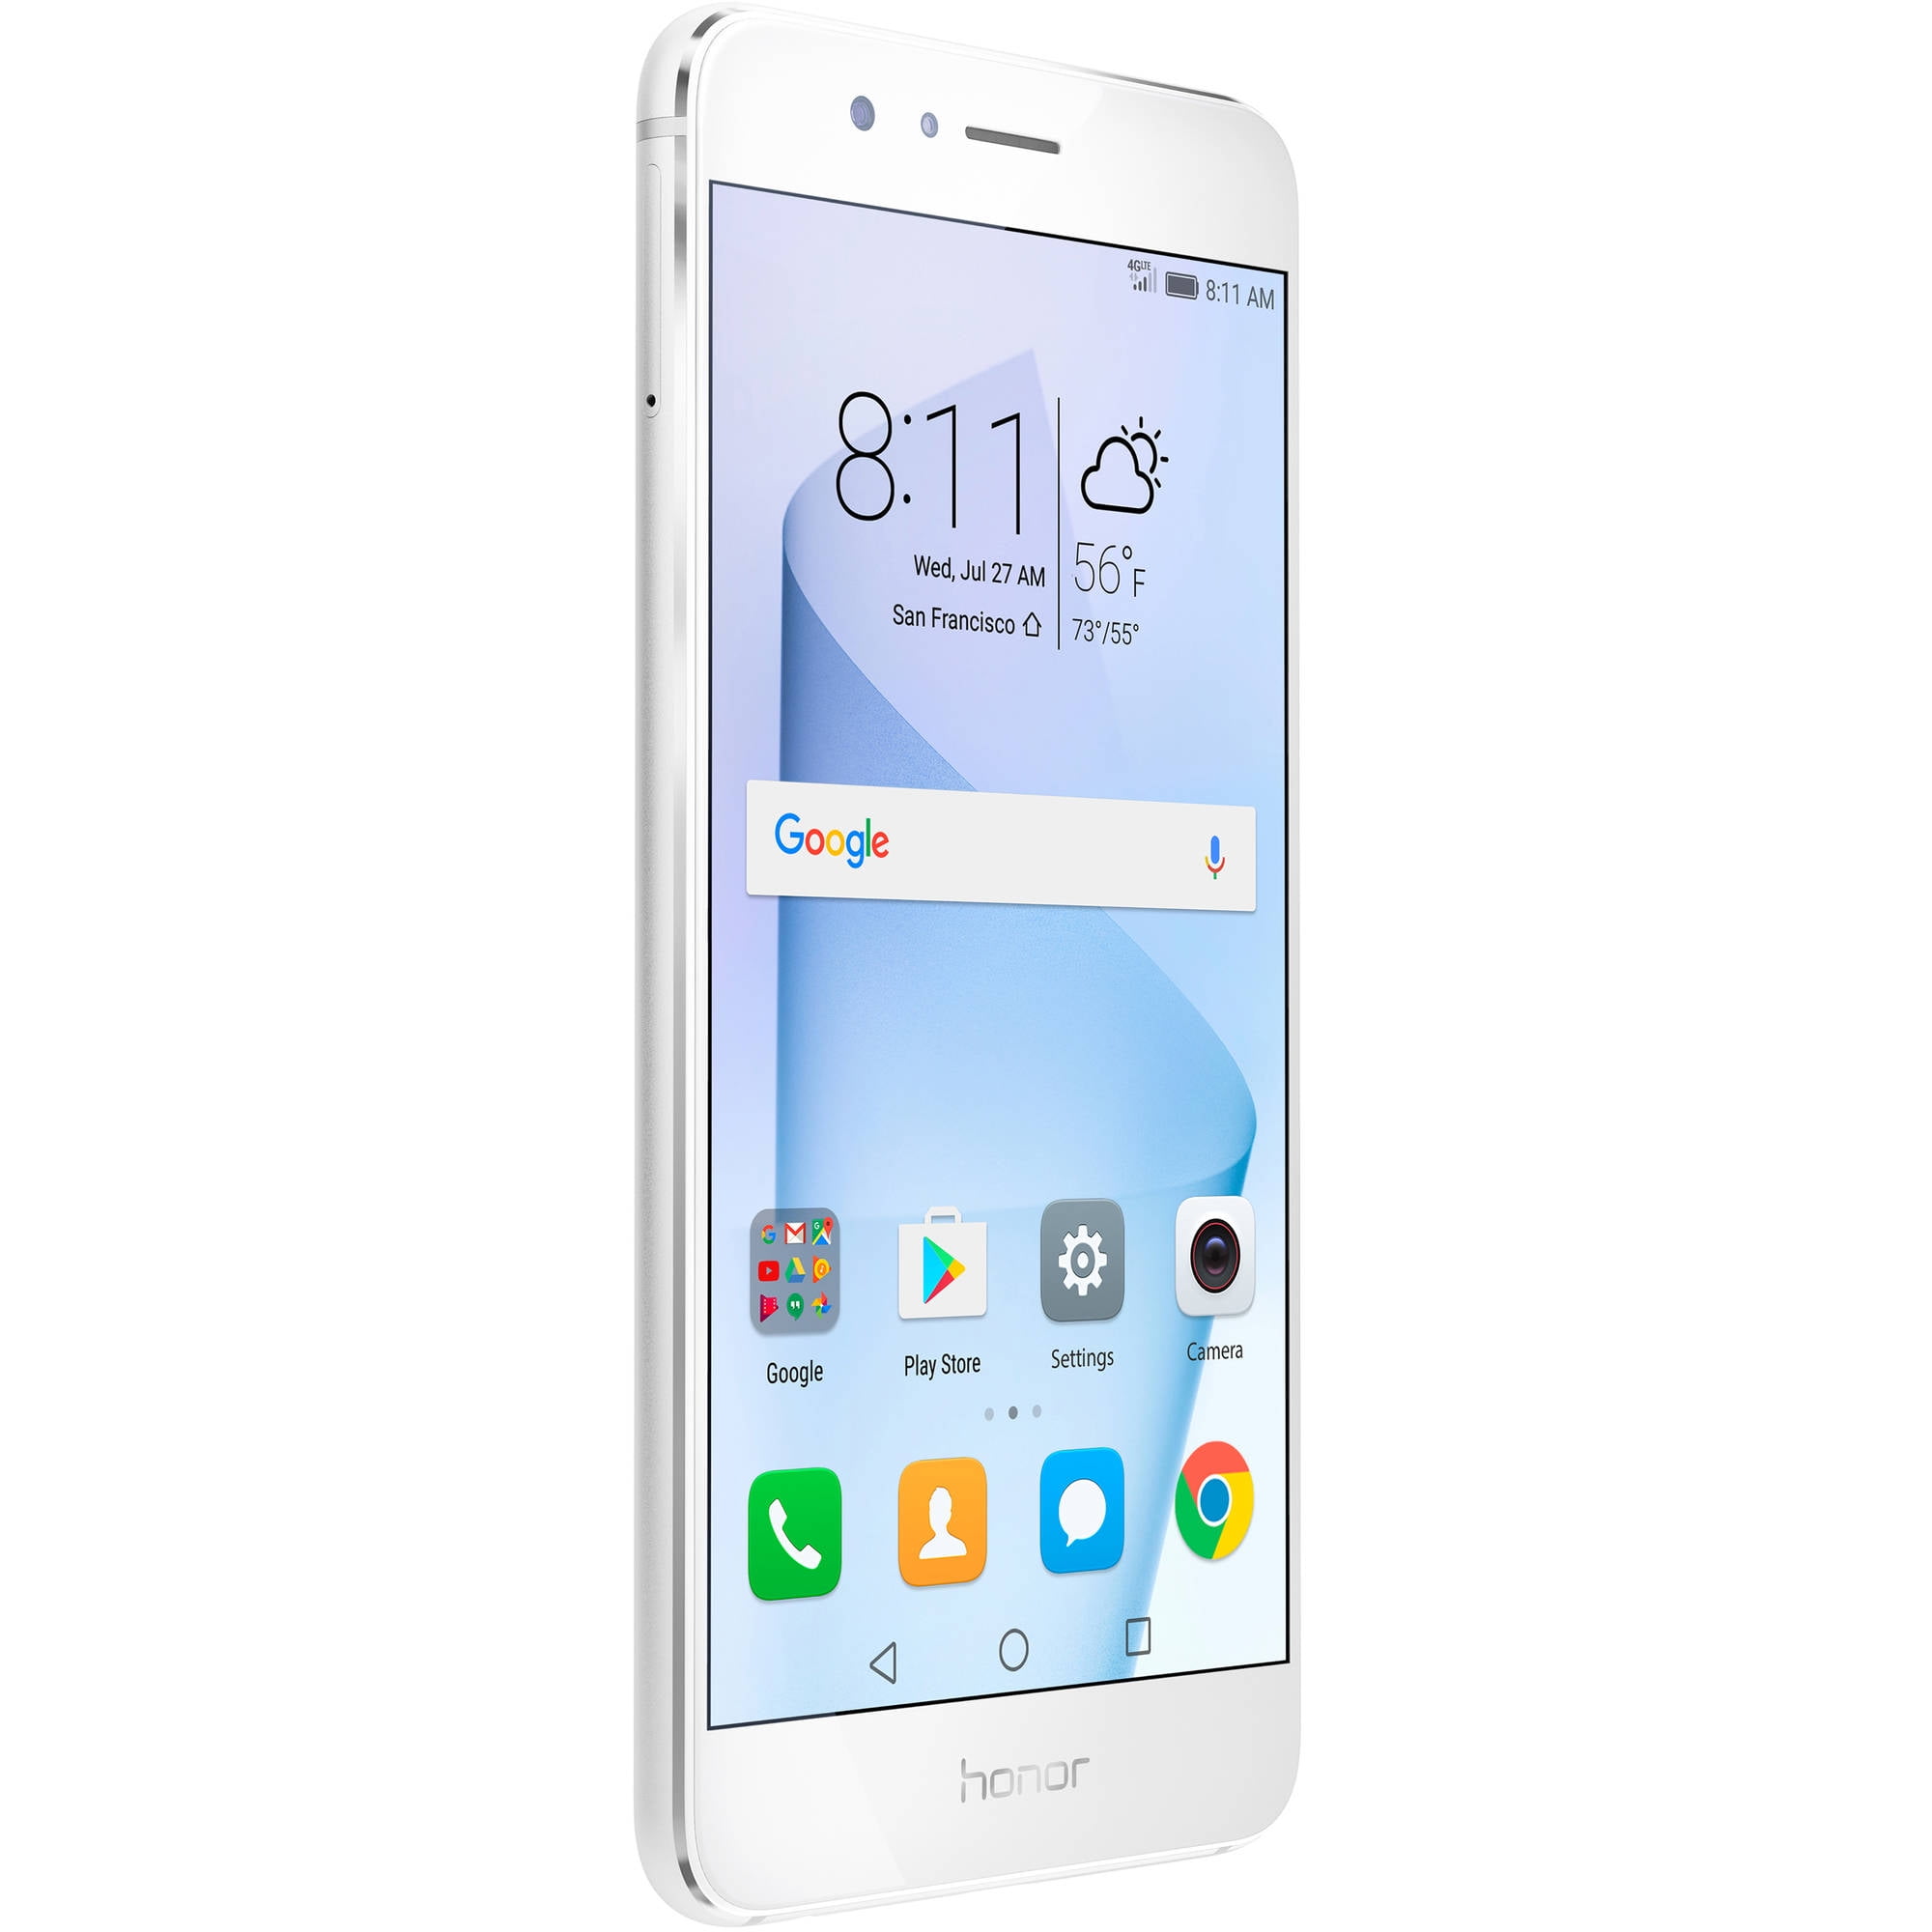 Correspondentie Zaklampen metaal HUAWEI Honor 8 64GB GSM 4G LTE Android Smartphone with Honor 8 Gift Box  (Unlocked) - Walmart.com